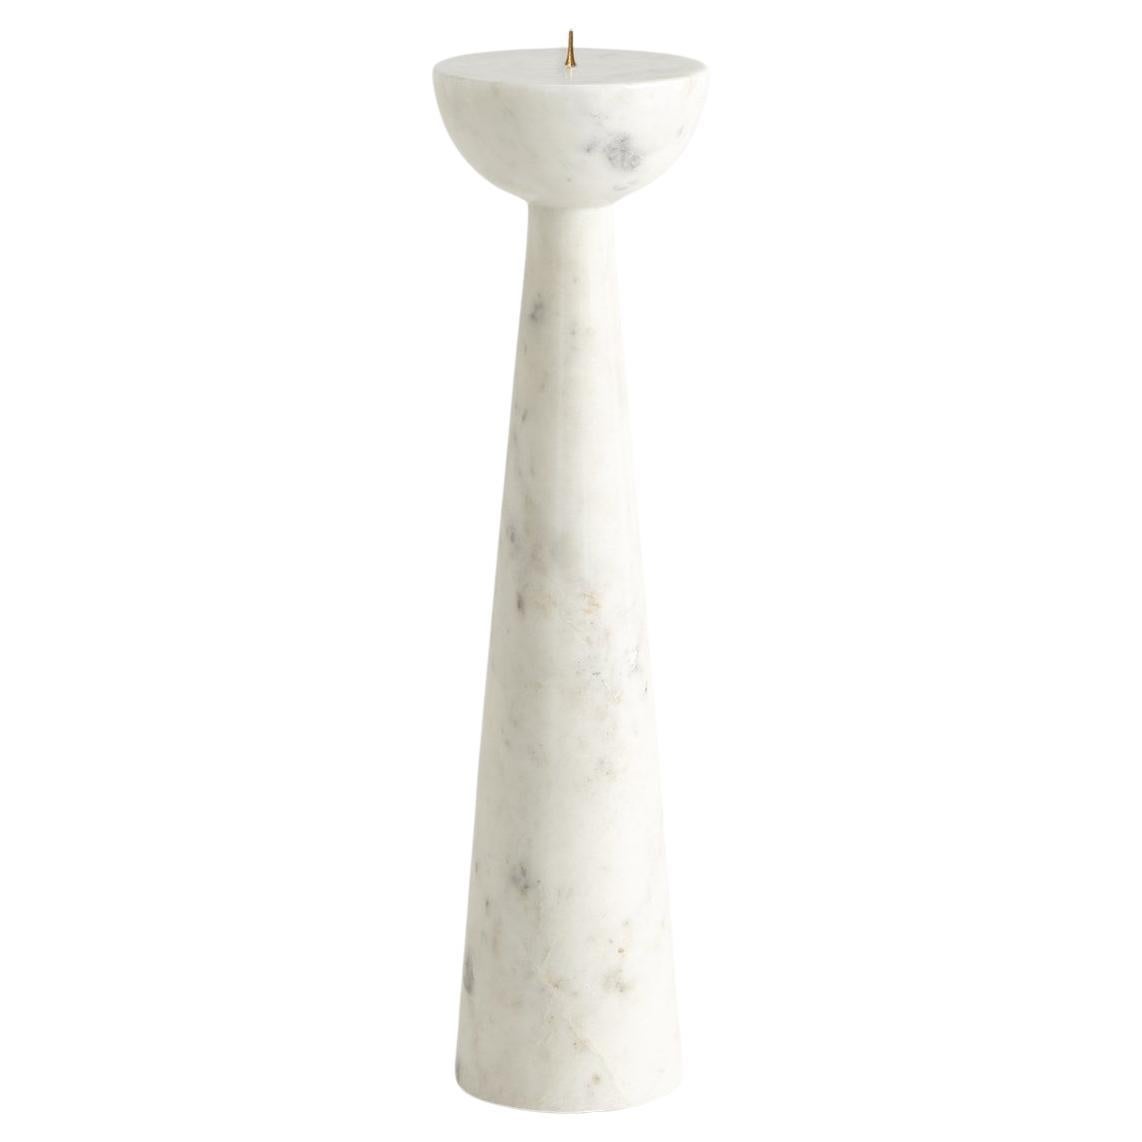 Hand-carved round marble candlestick sourced by Martyn Lawrence Bullard
Modern, yet transitional
